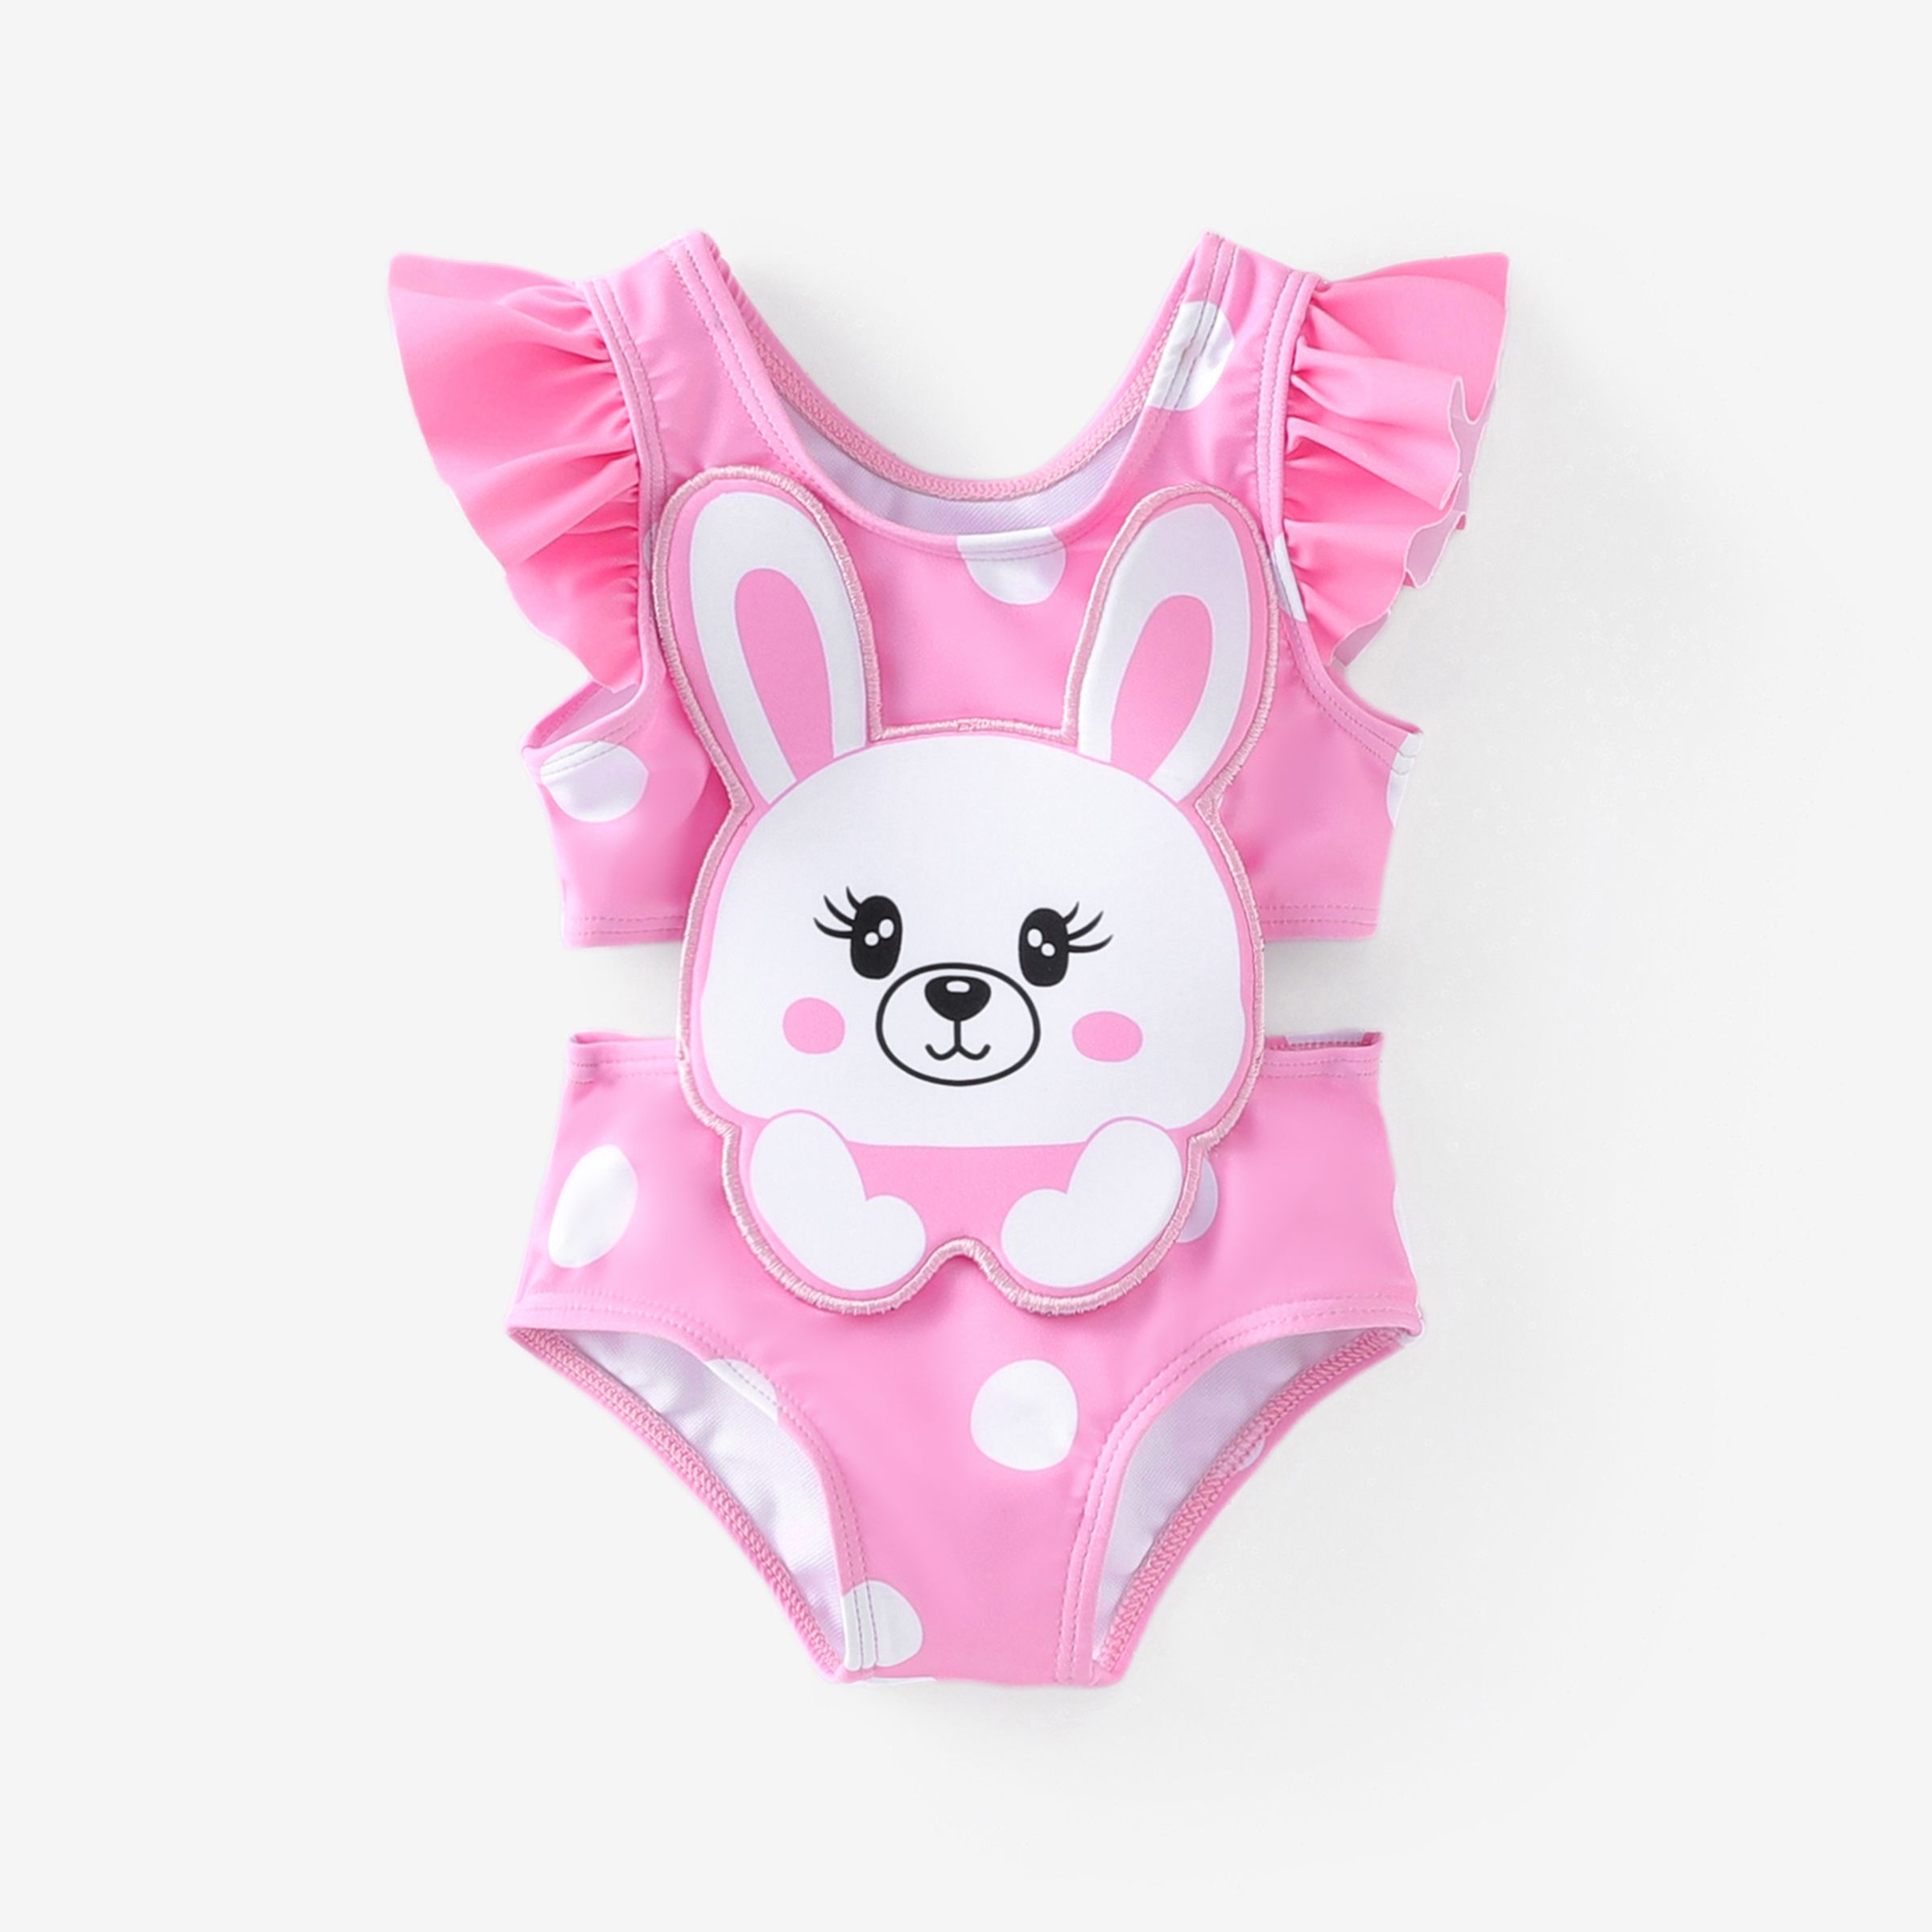 Baby Girl Rabbit/Lion Applique Polka Dots Ruffled One-Piece Swimsuit